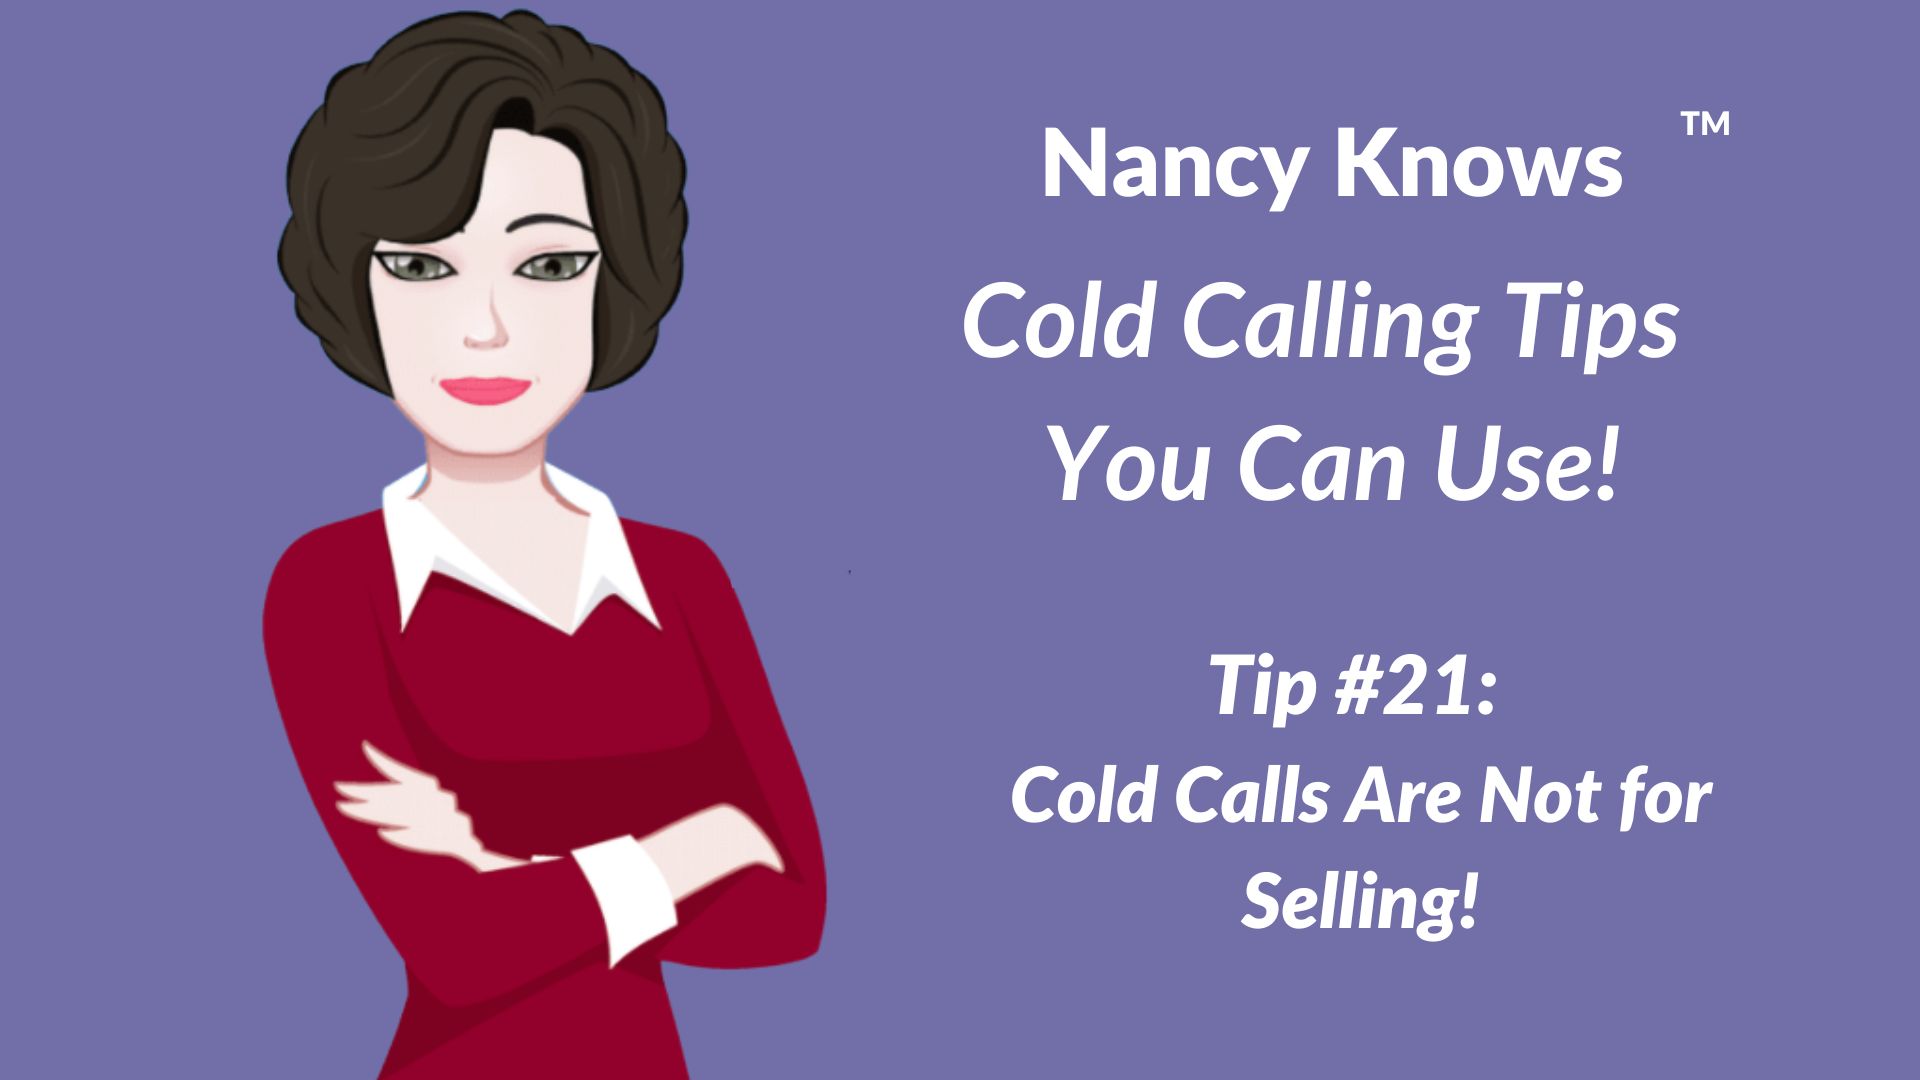 Nancy Knows #21:  Cold Calls are Not for Selling